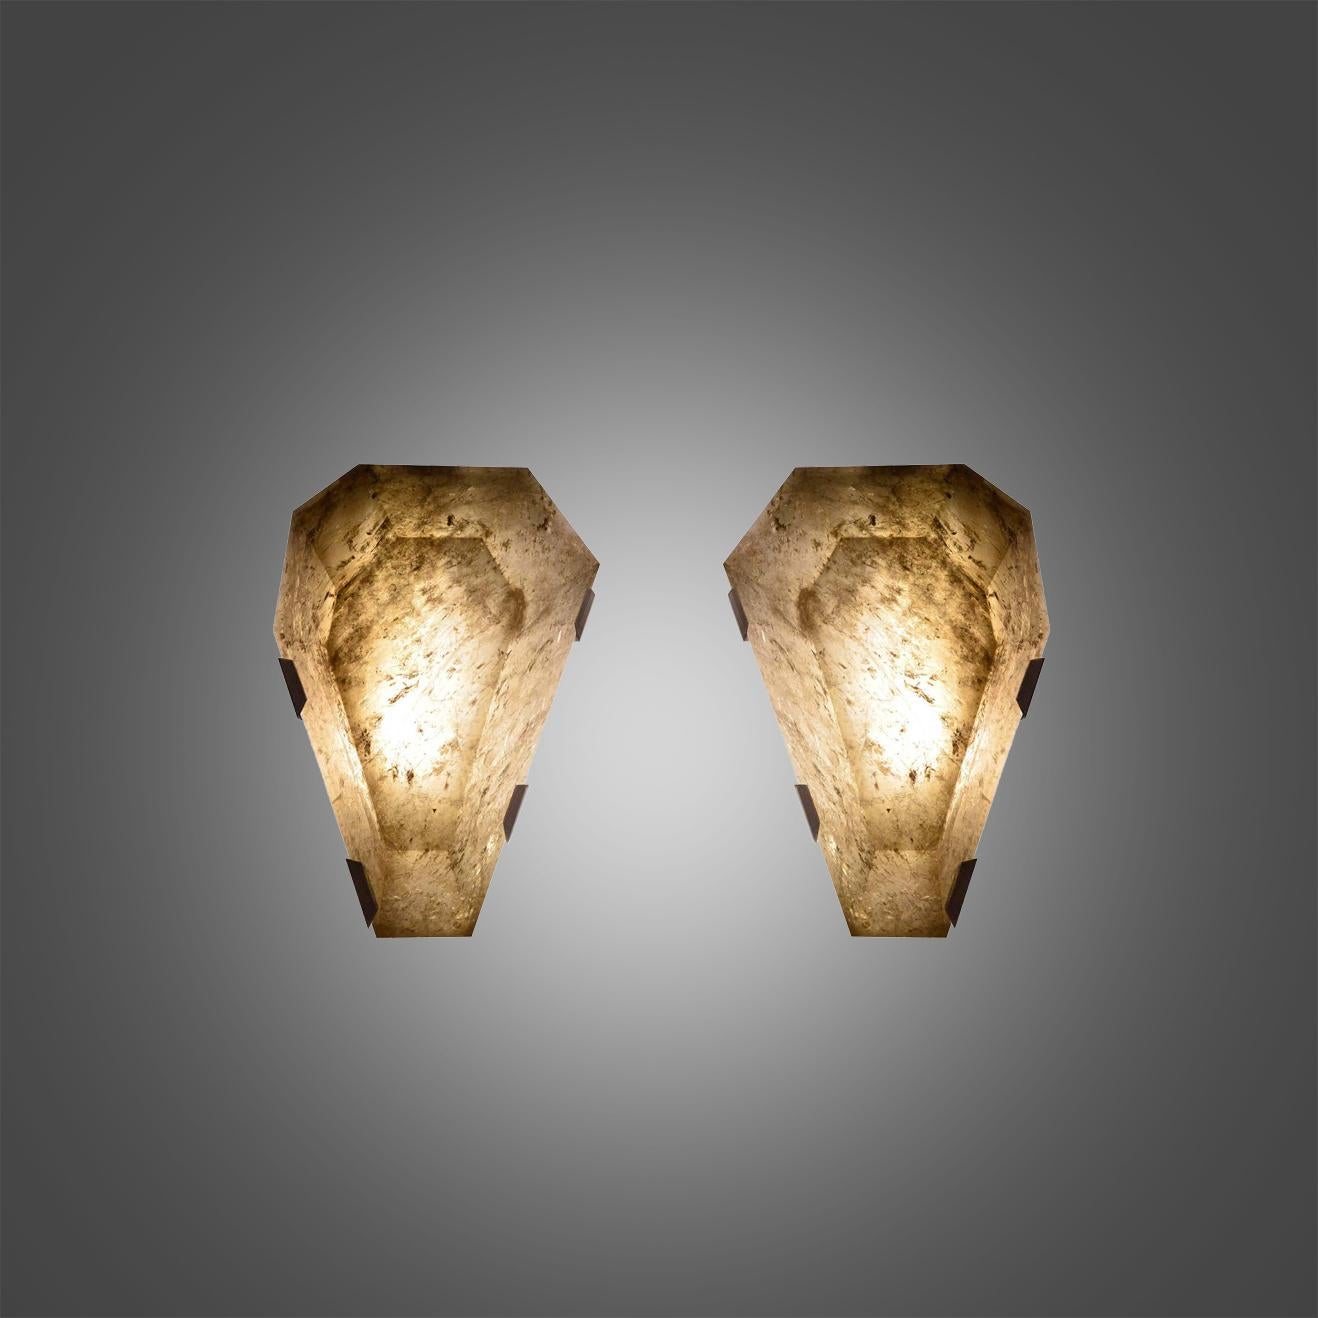 Group of four fine carved diamond form smoky rock crystal sconces with brass mounts. Created by Phoenix Gallery, NYC.
Each sconce installed two sockets, use candelabra lightbulbs, 120W total
Custom size and metal finish upon request.